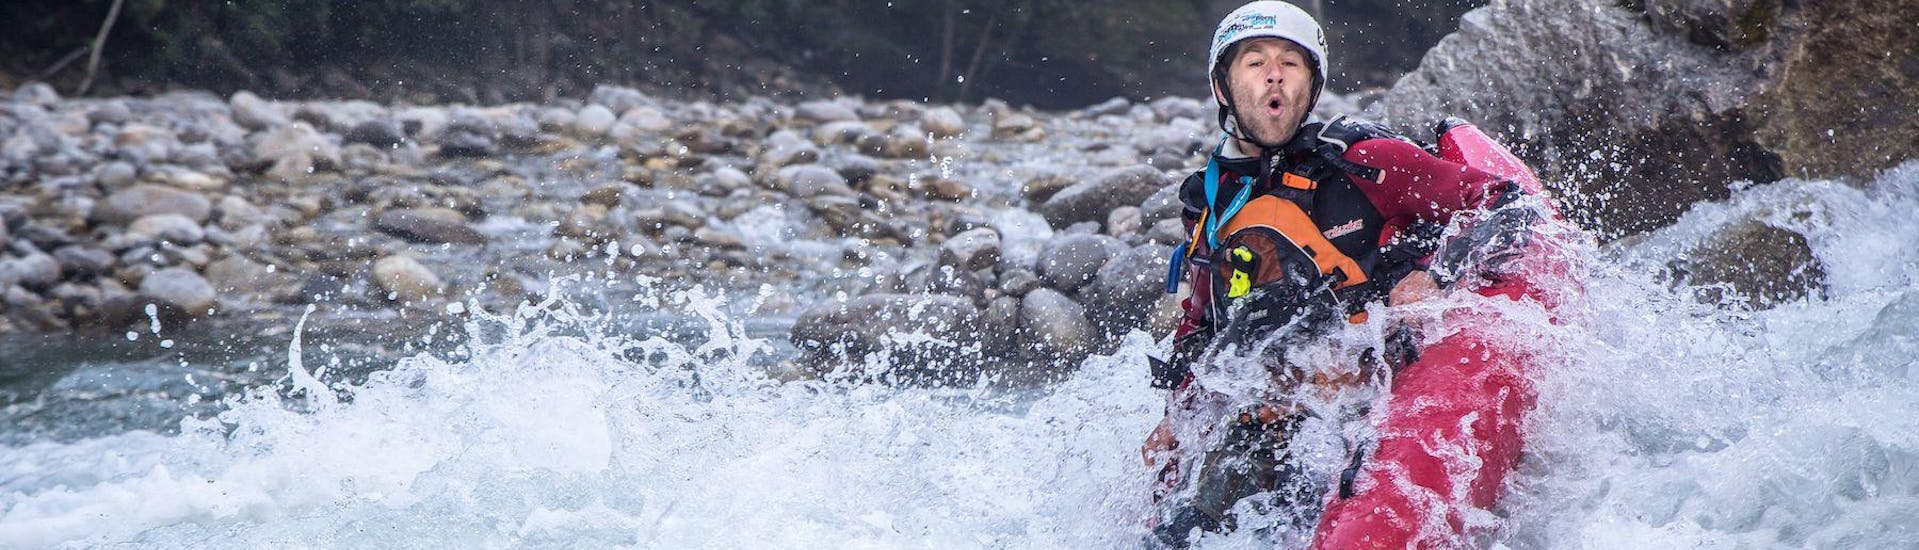 A participant of the tour River Bug for the Brave - Zemm with Mountain Sports Mayrhofen is trying to keep his tube steady in the rousing rapids of the river.